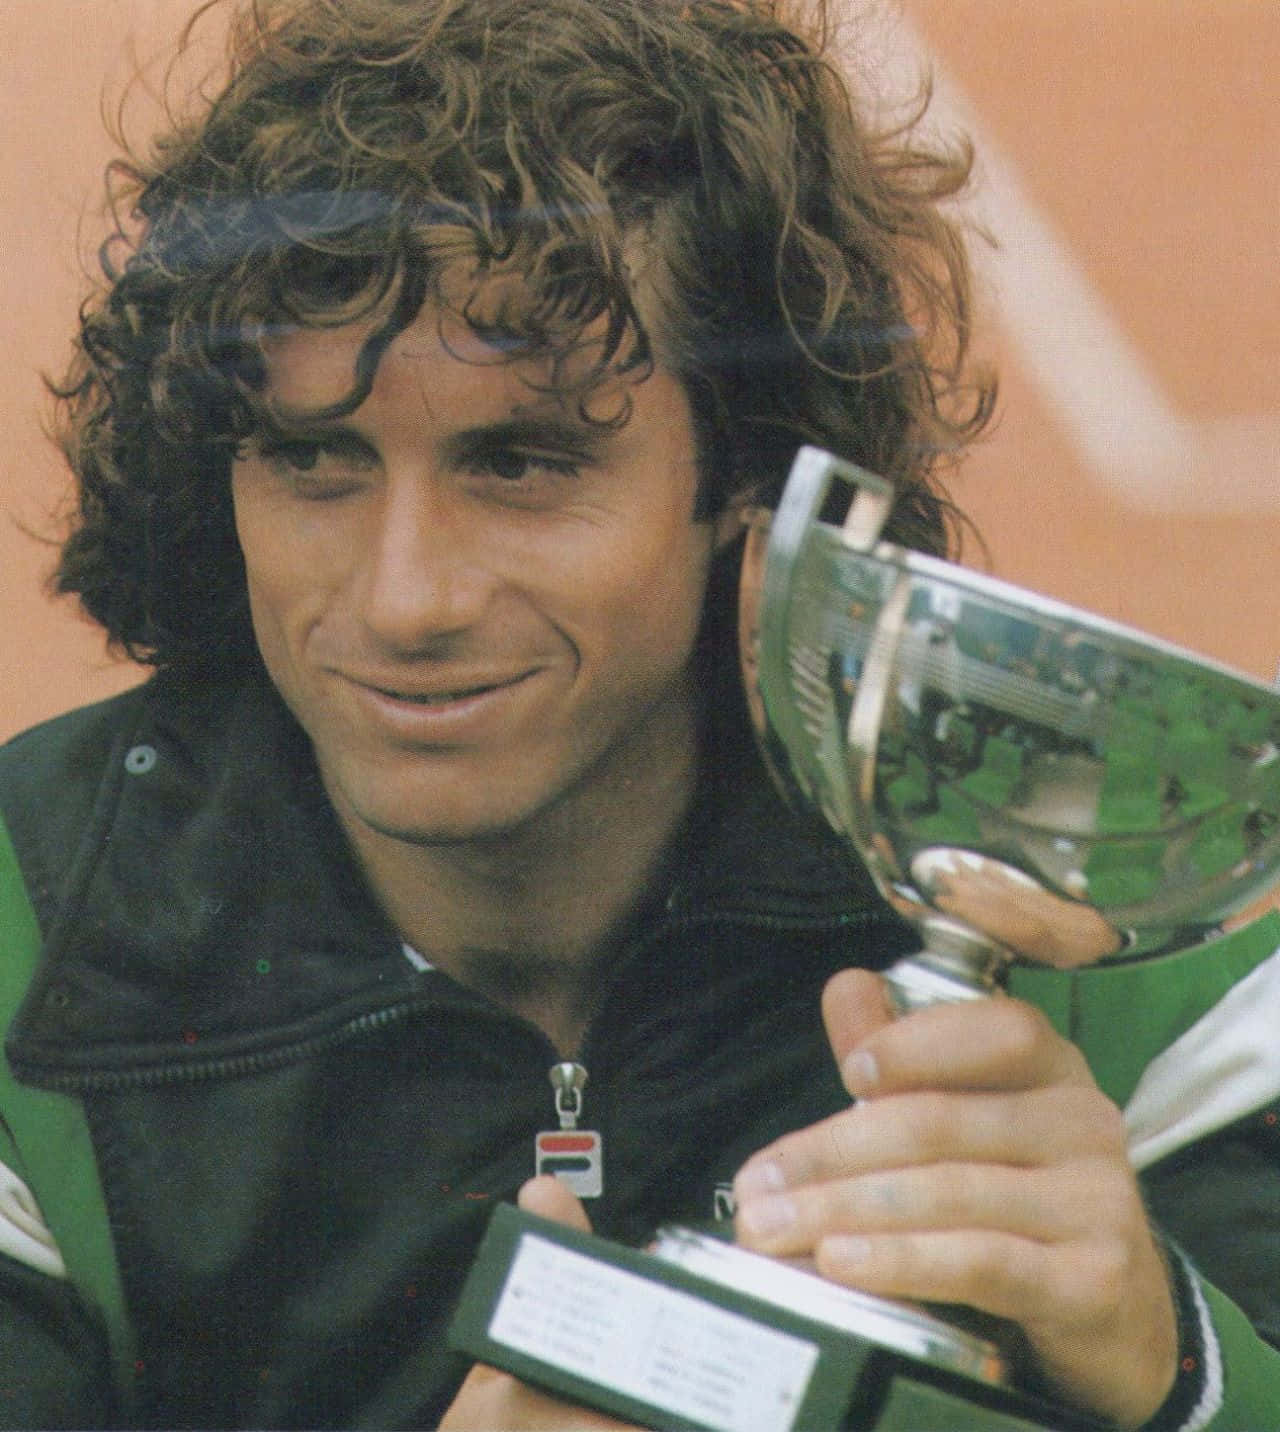 Argentinskaprofessionella Tennisspelaren Guillermo Vilas Mästerskapstrofé. (this Sentence Refers To A Computer Or Mobile Wallpaper Featuring An Image Of Guillermo Vilas Holding His Championship Trophy As A Tennis Player.) Wallpaper